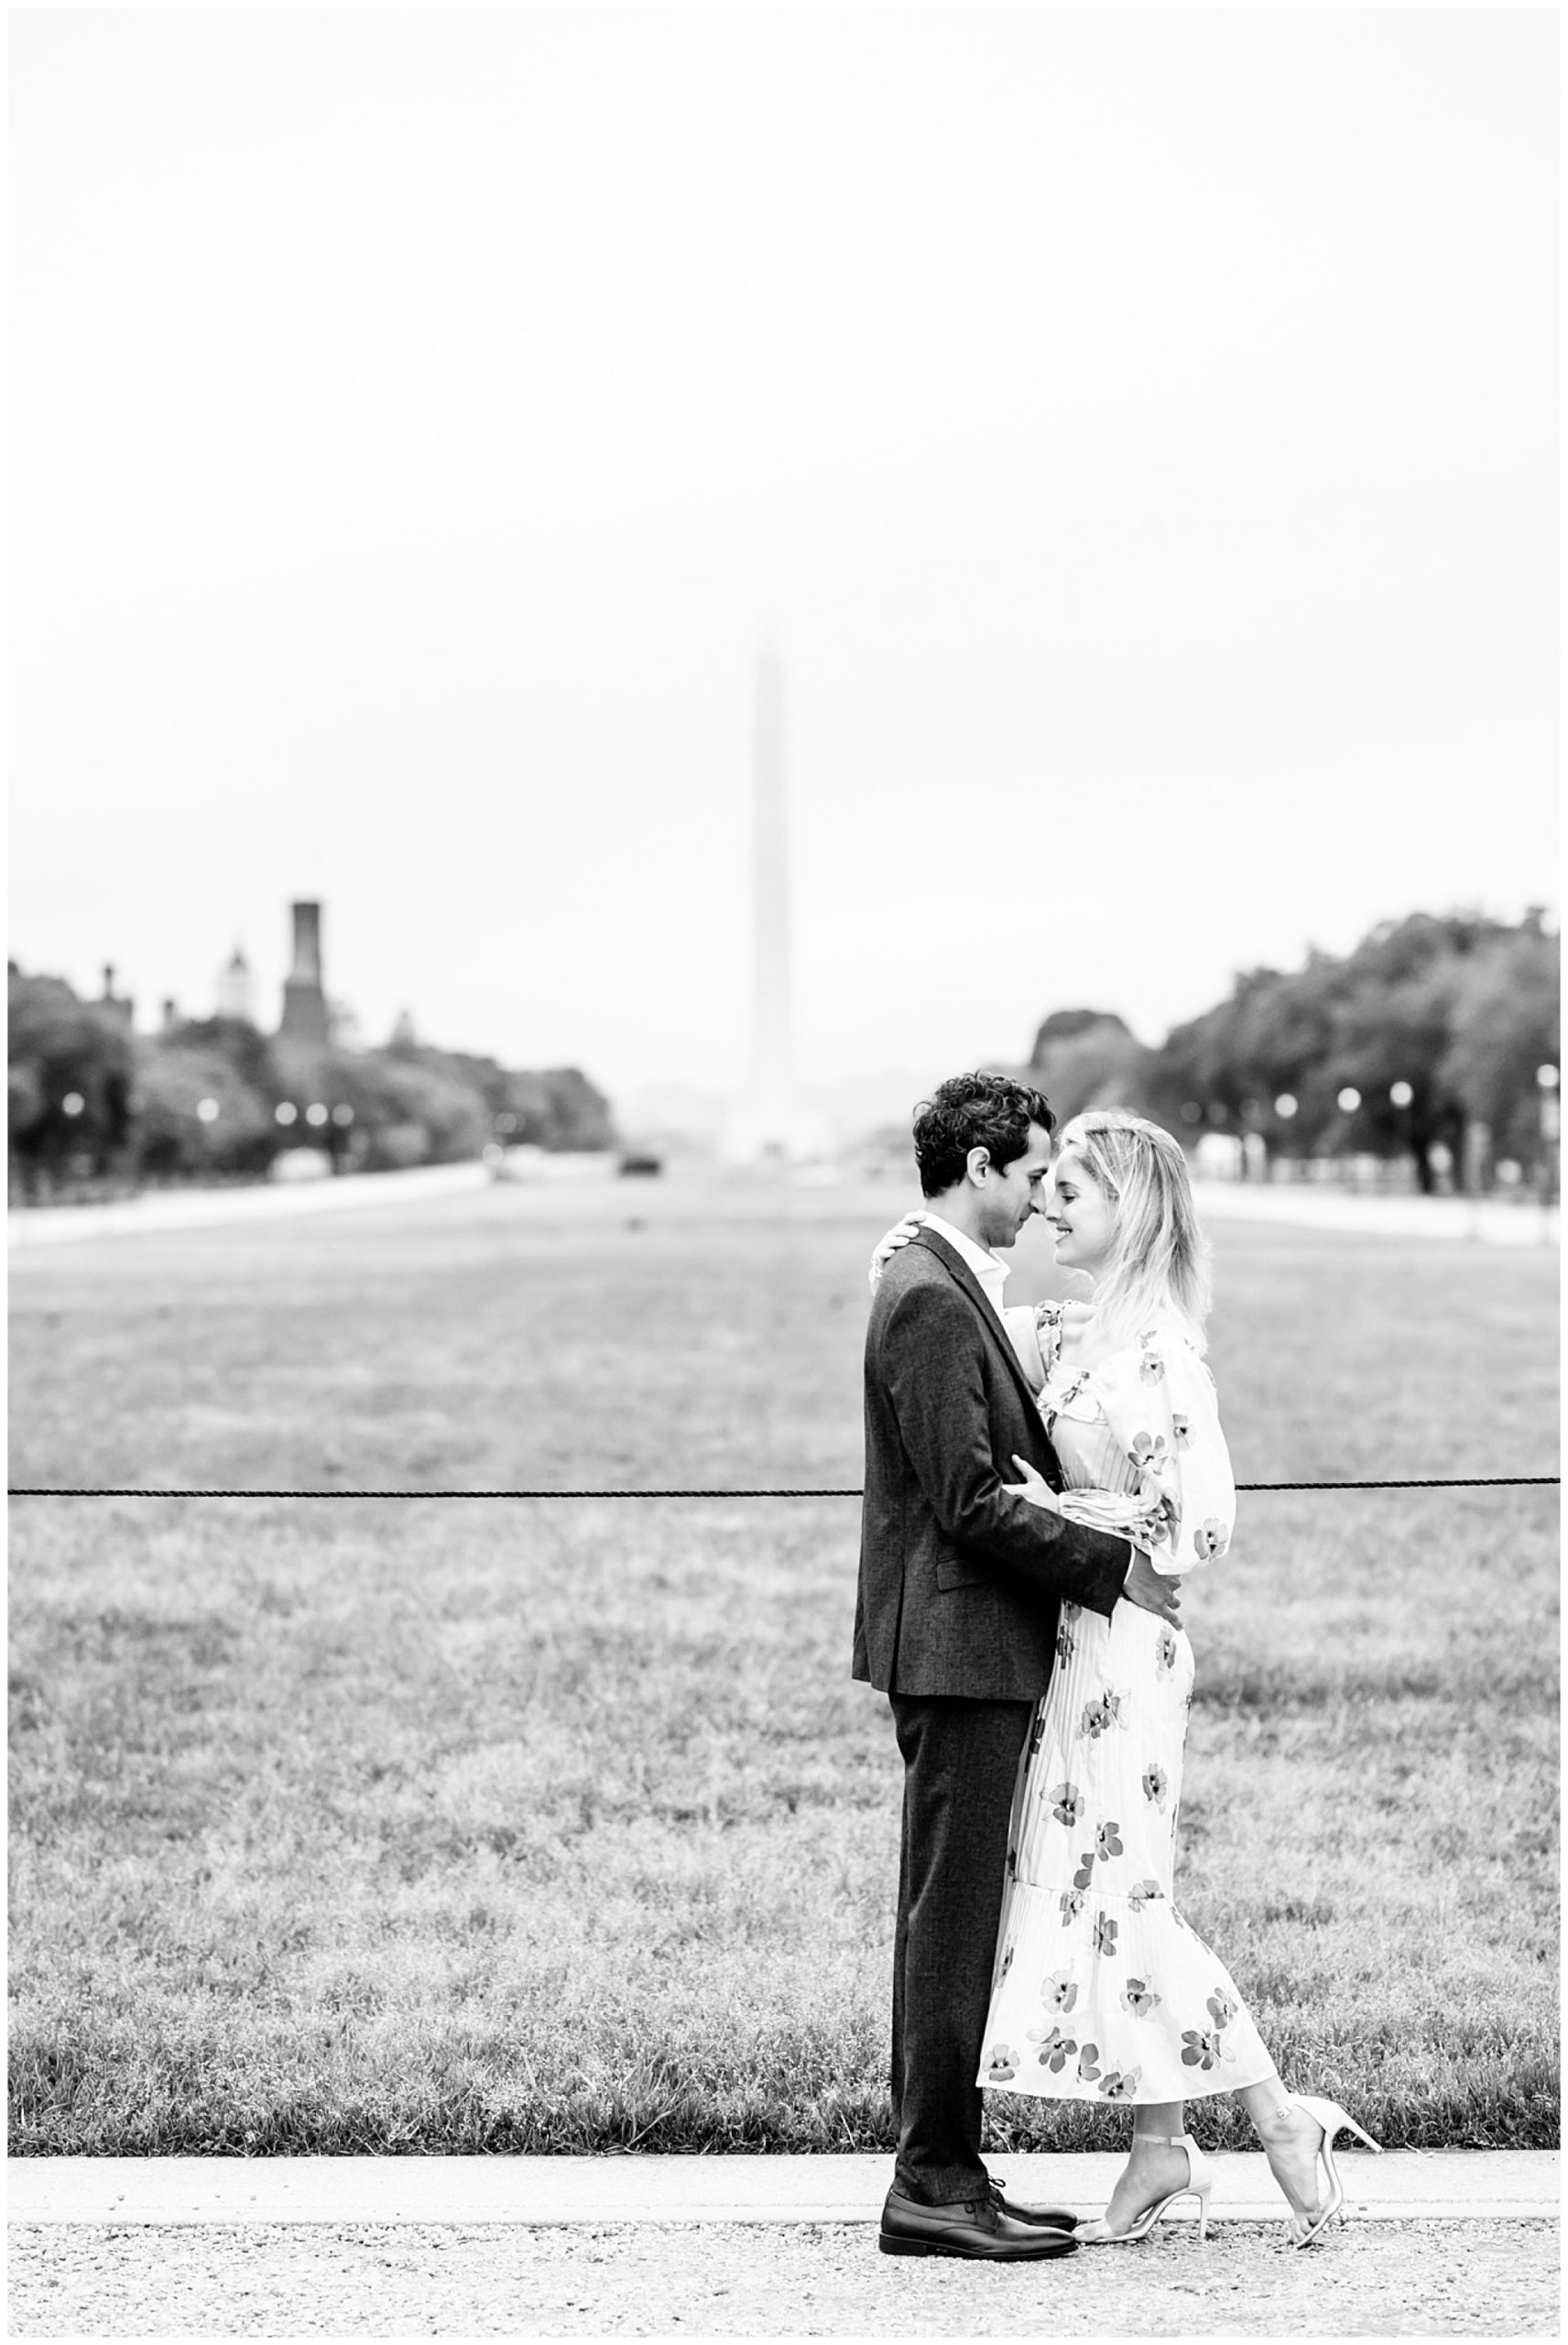 spring Capitol Hill engagement photos, Capitol Hill DC, DC Capitol Hill, DC engagement photos, DC engagement photographer, Capitol Hill photographer, Capitol Hill engagement photographer, Virginia engagement photographer, Rachel E.H. Photography, romantic portraits, spring portraits, spring engagement photos, National Mall engagement photos, floral print dress, engagement photos outfits, romantic black and white portraits